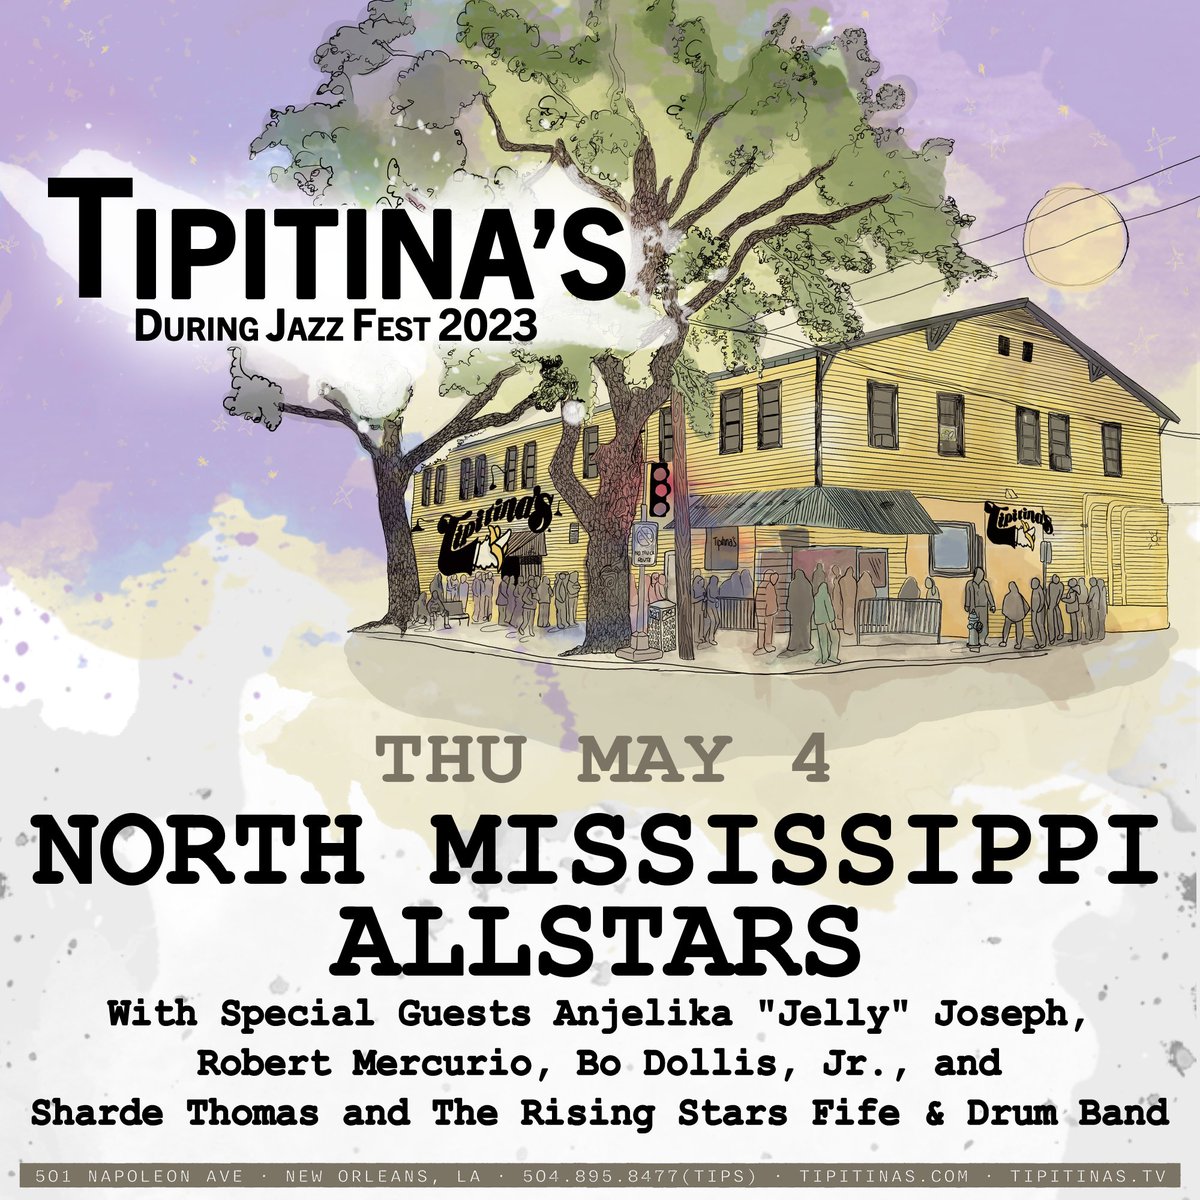 We're excited to play @Tipitinas on May 4 with some very special guests during @jazzfest! Tickets are onsale now with special code: JF2023. Tickets & info at: ticketweb.com/event/north-mi…